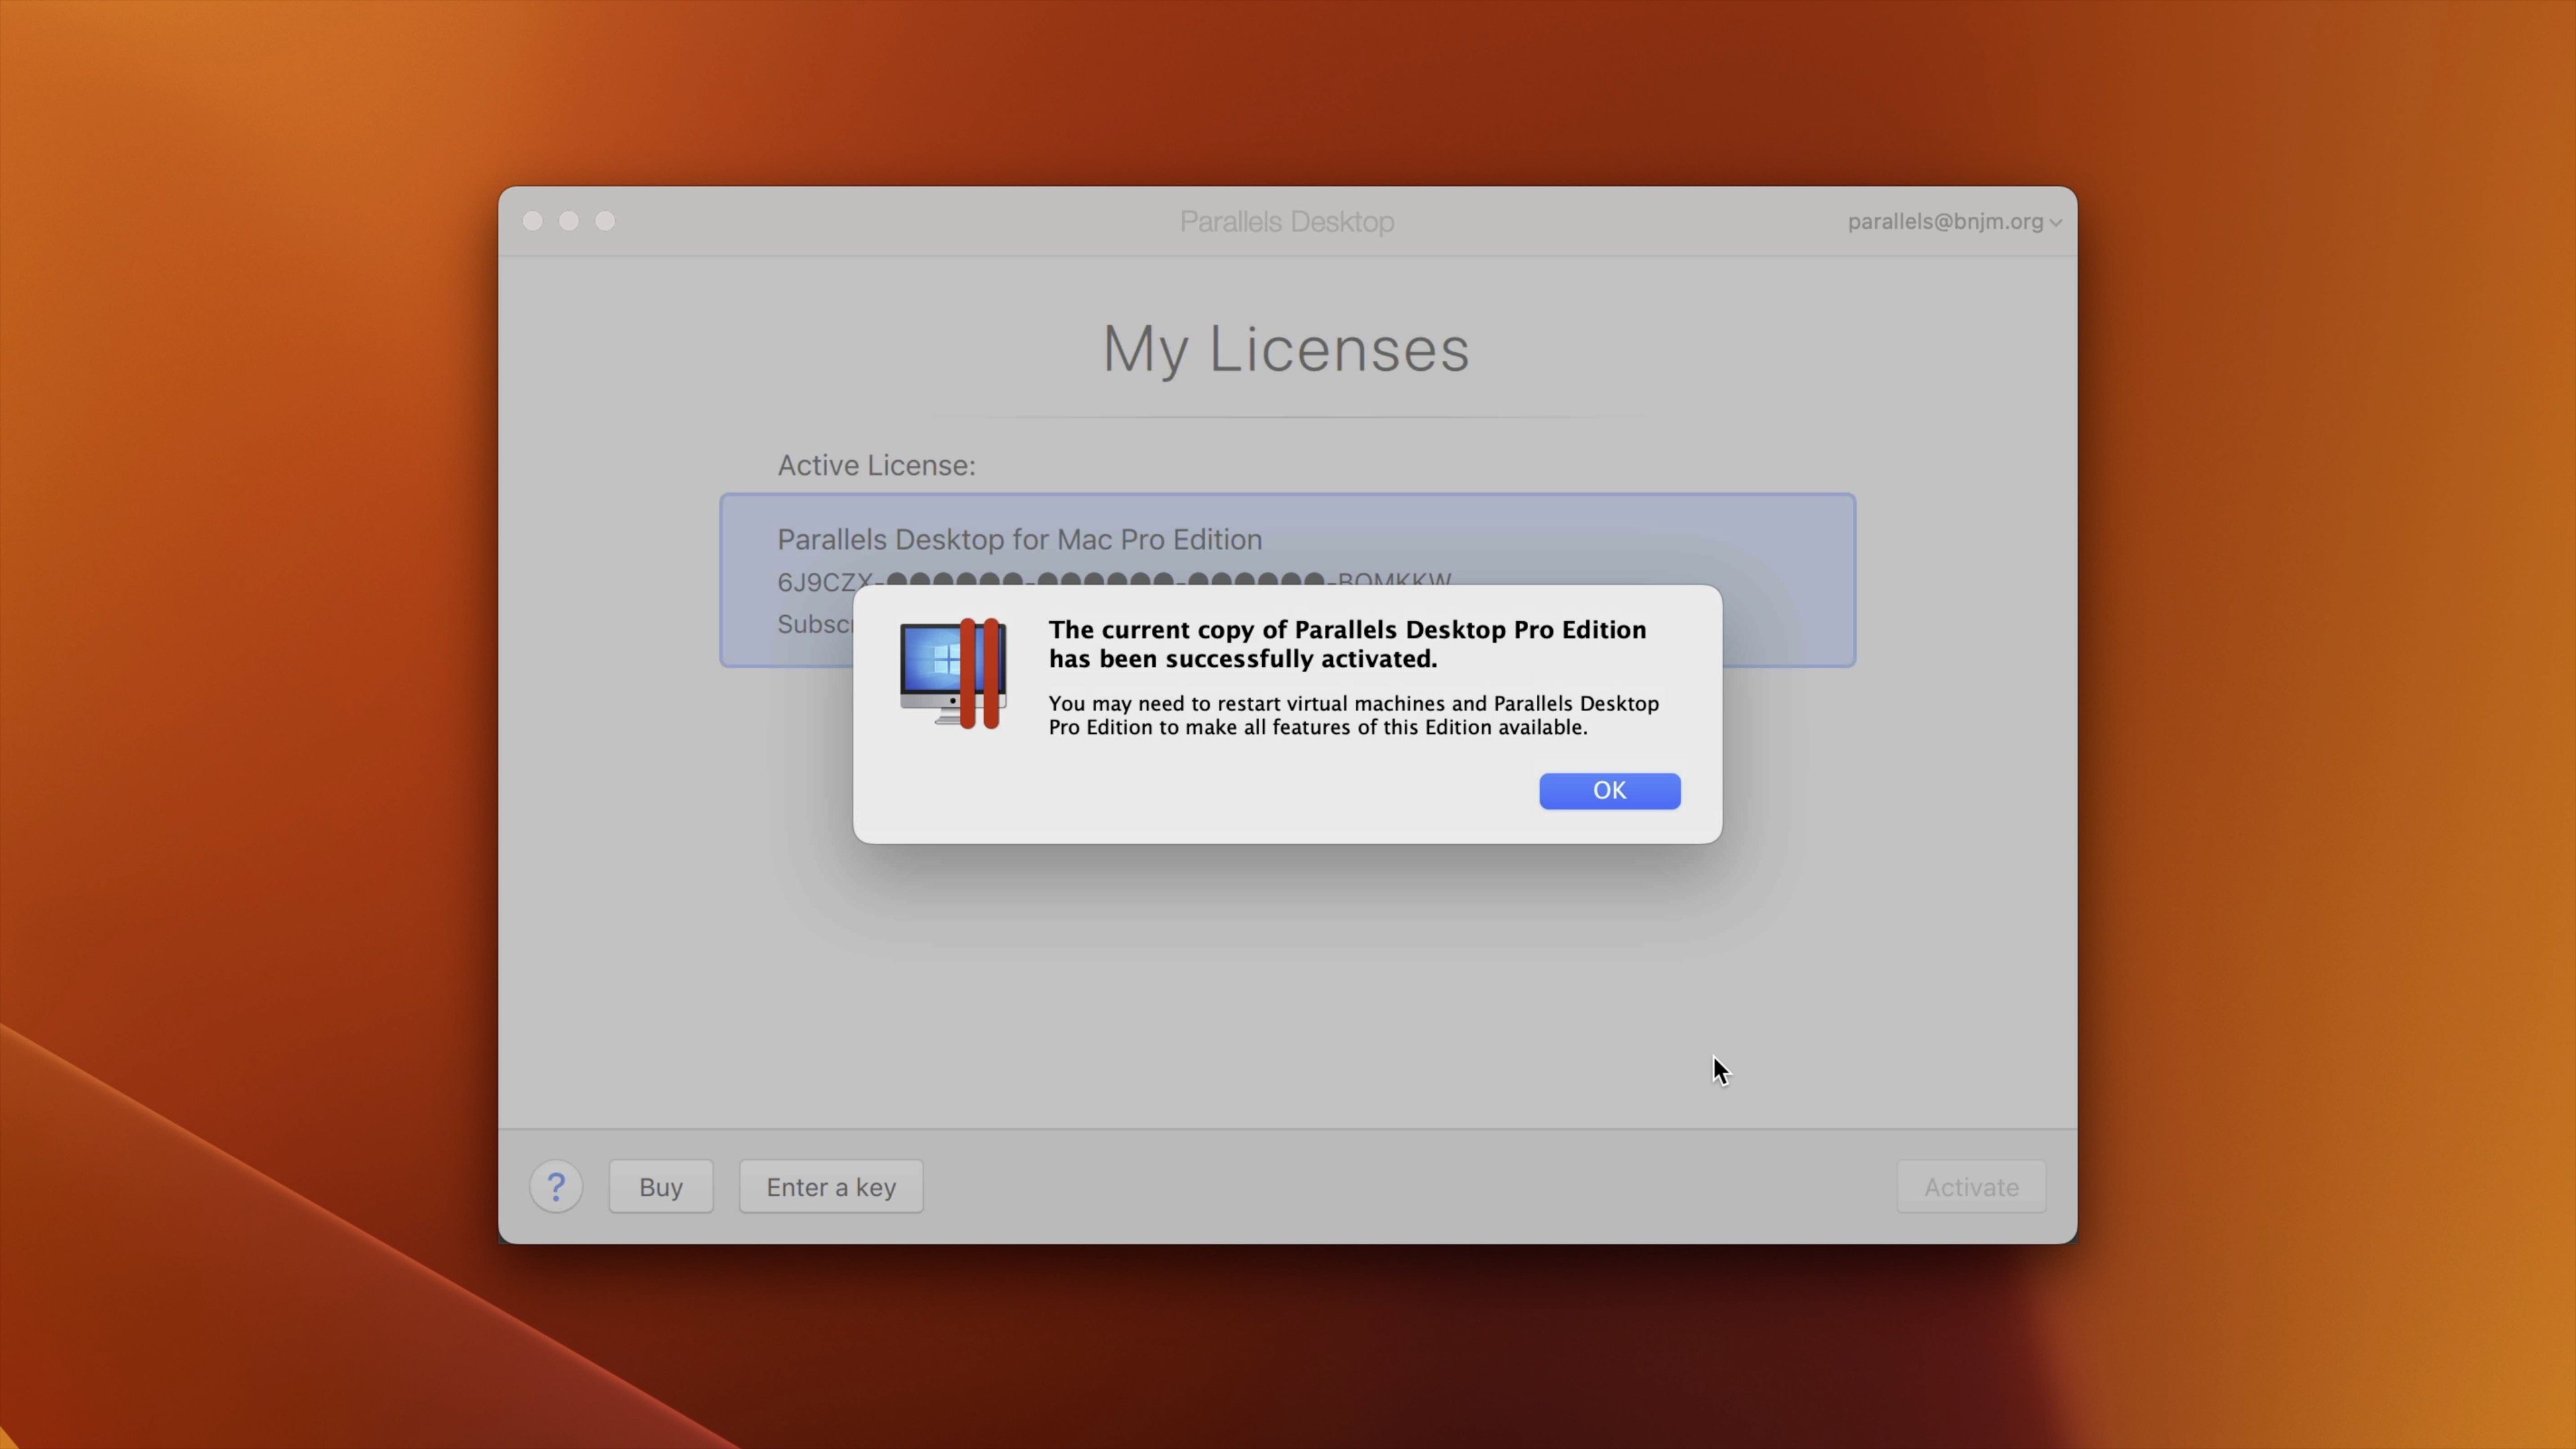 Activating Parallels Desktop Pro Edition with my license.